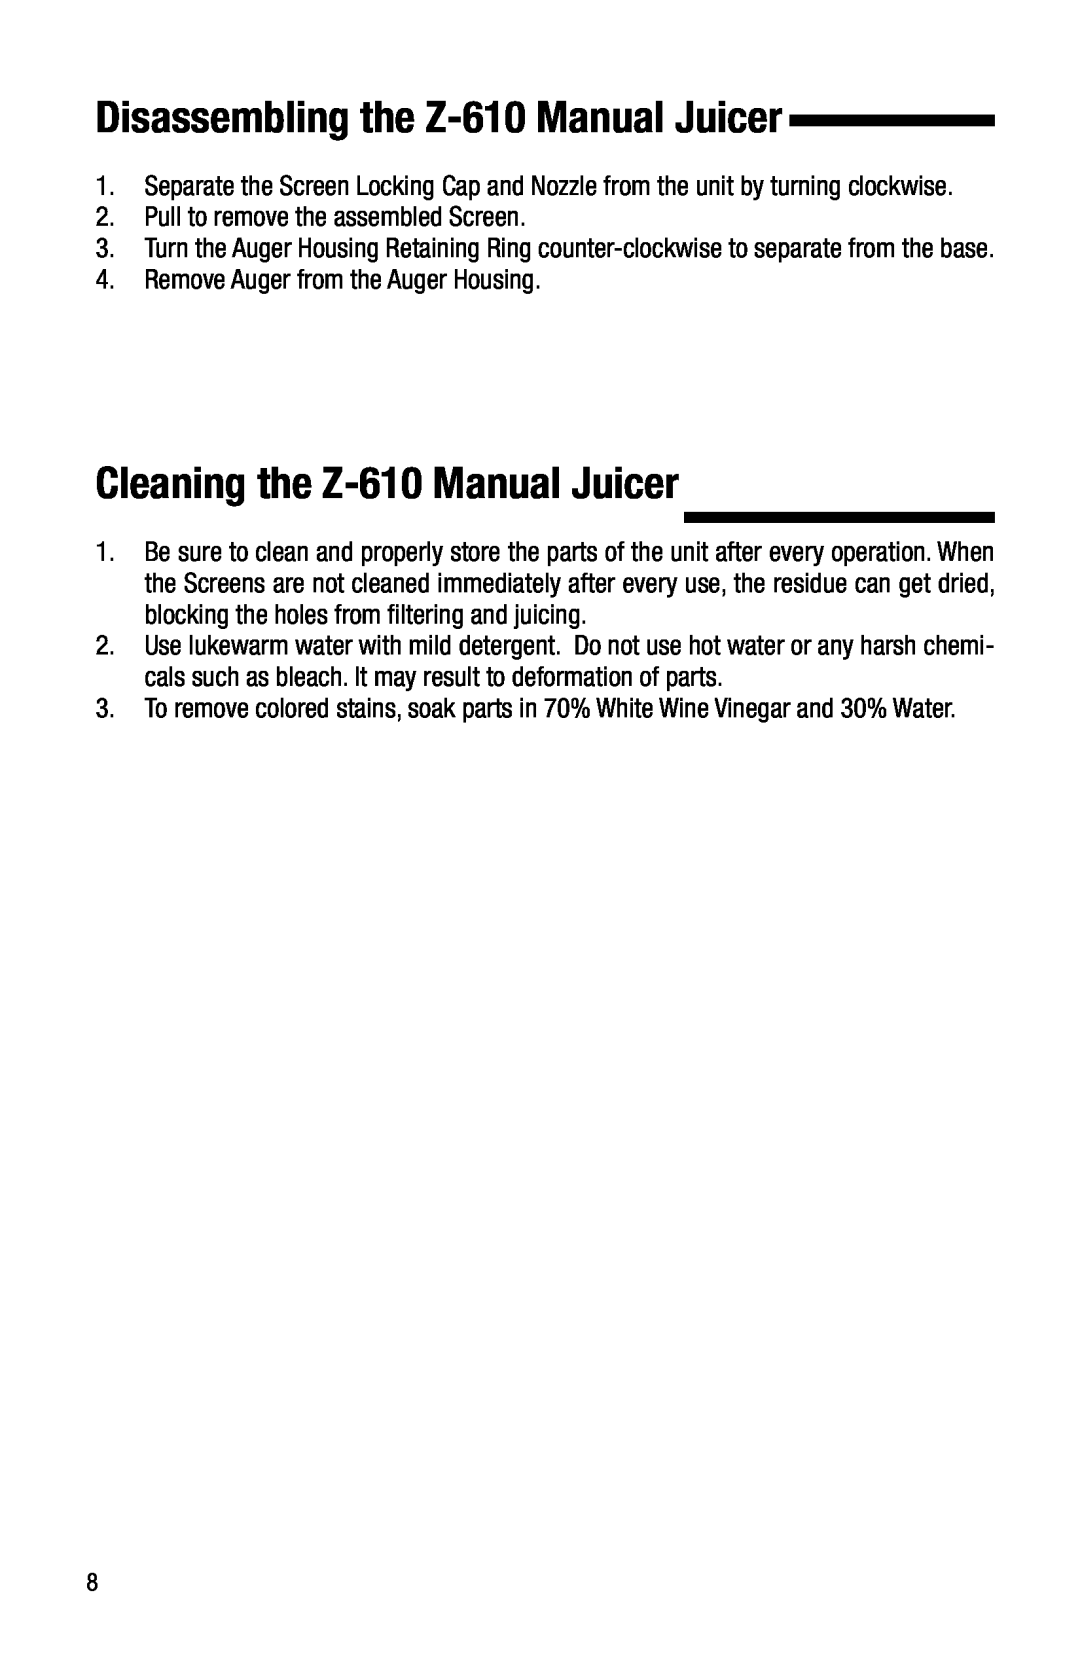 Tribest Disassembling the Z-610Manual Juicer, Cleaning the Z-610Manual Juicer, Pull to remove the assembled Screen 